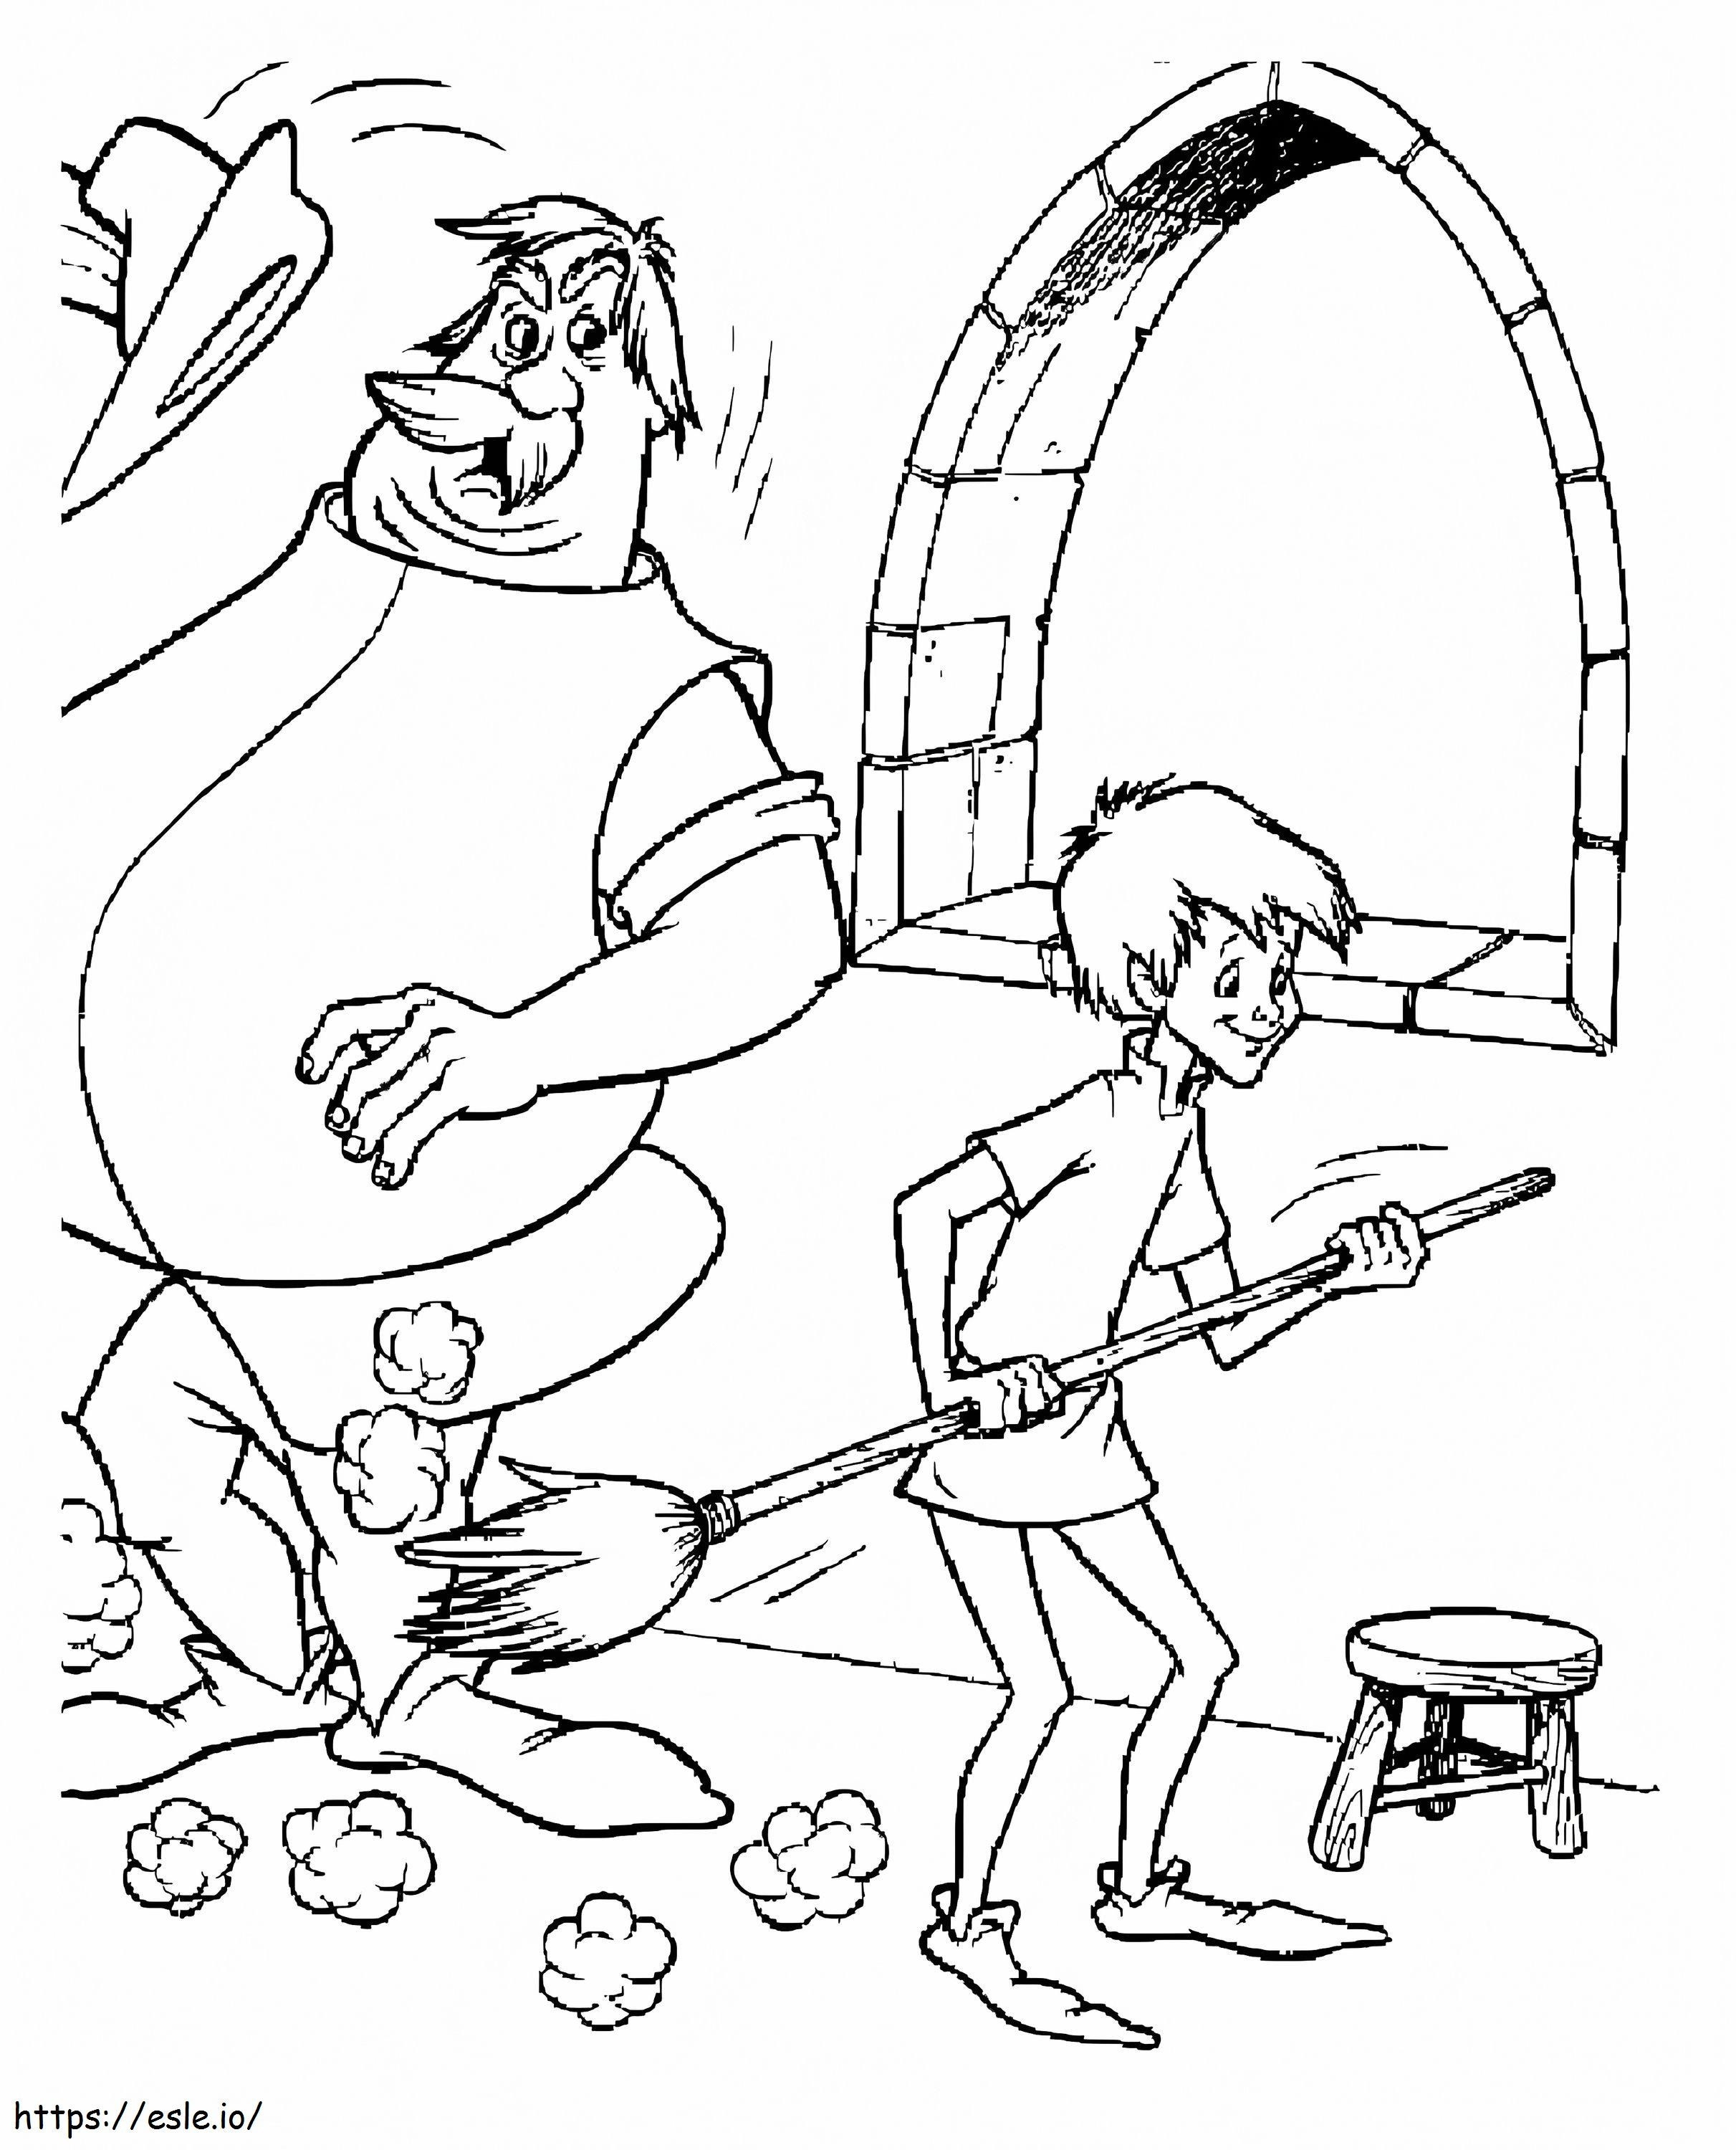 Sir Ector And Arthur coloring page